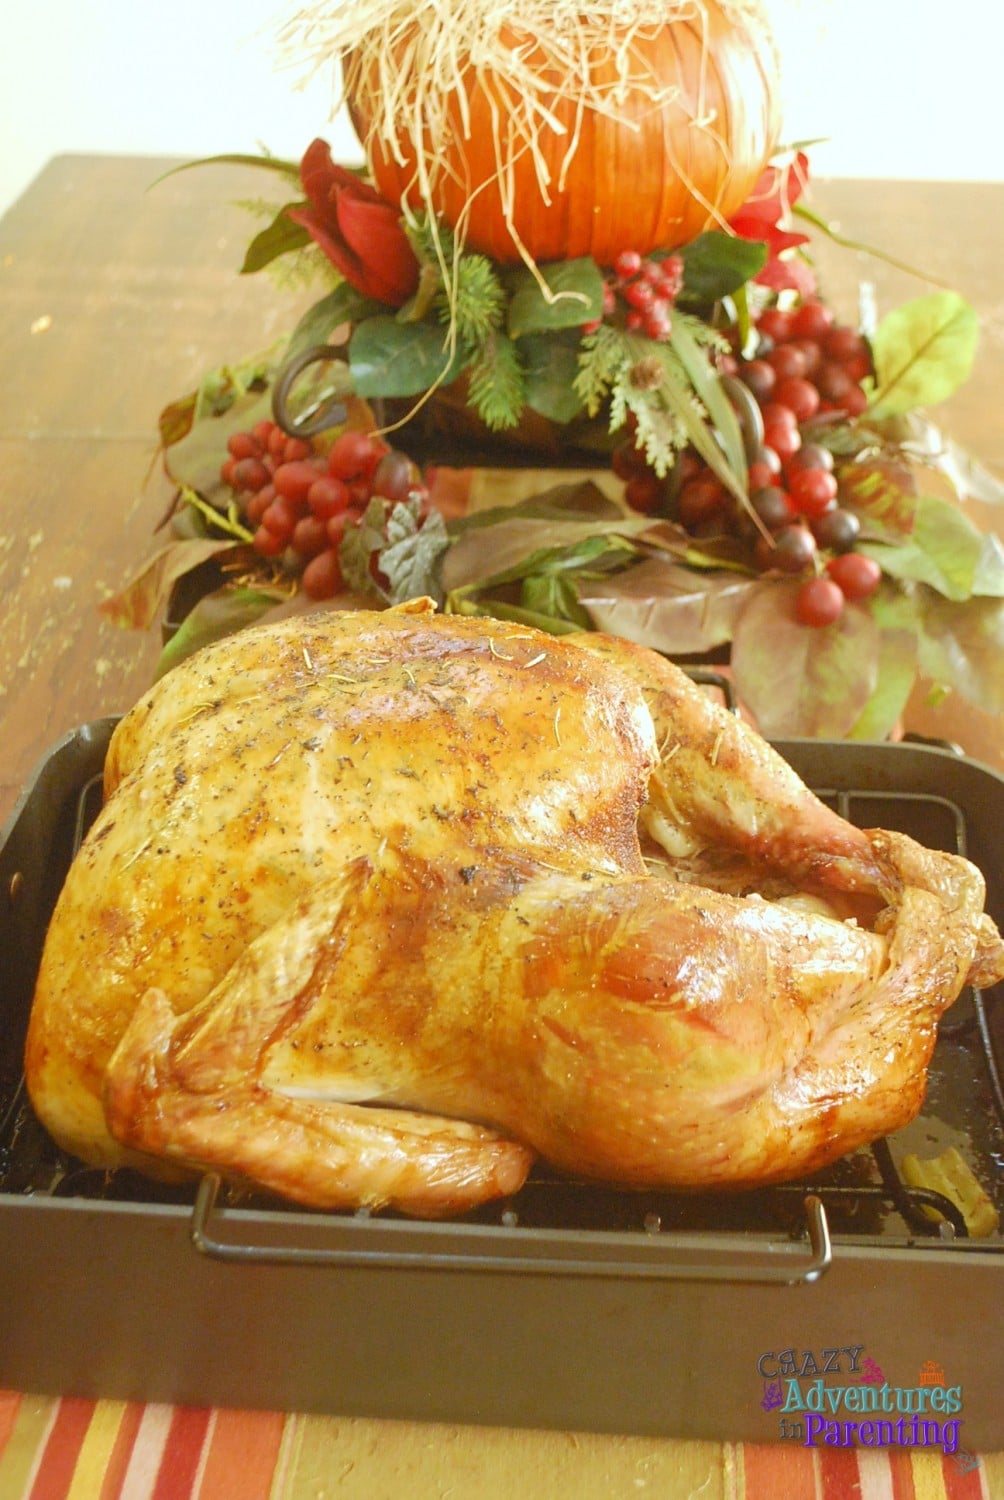 Tips to Make the Best Holiday Turkey